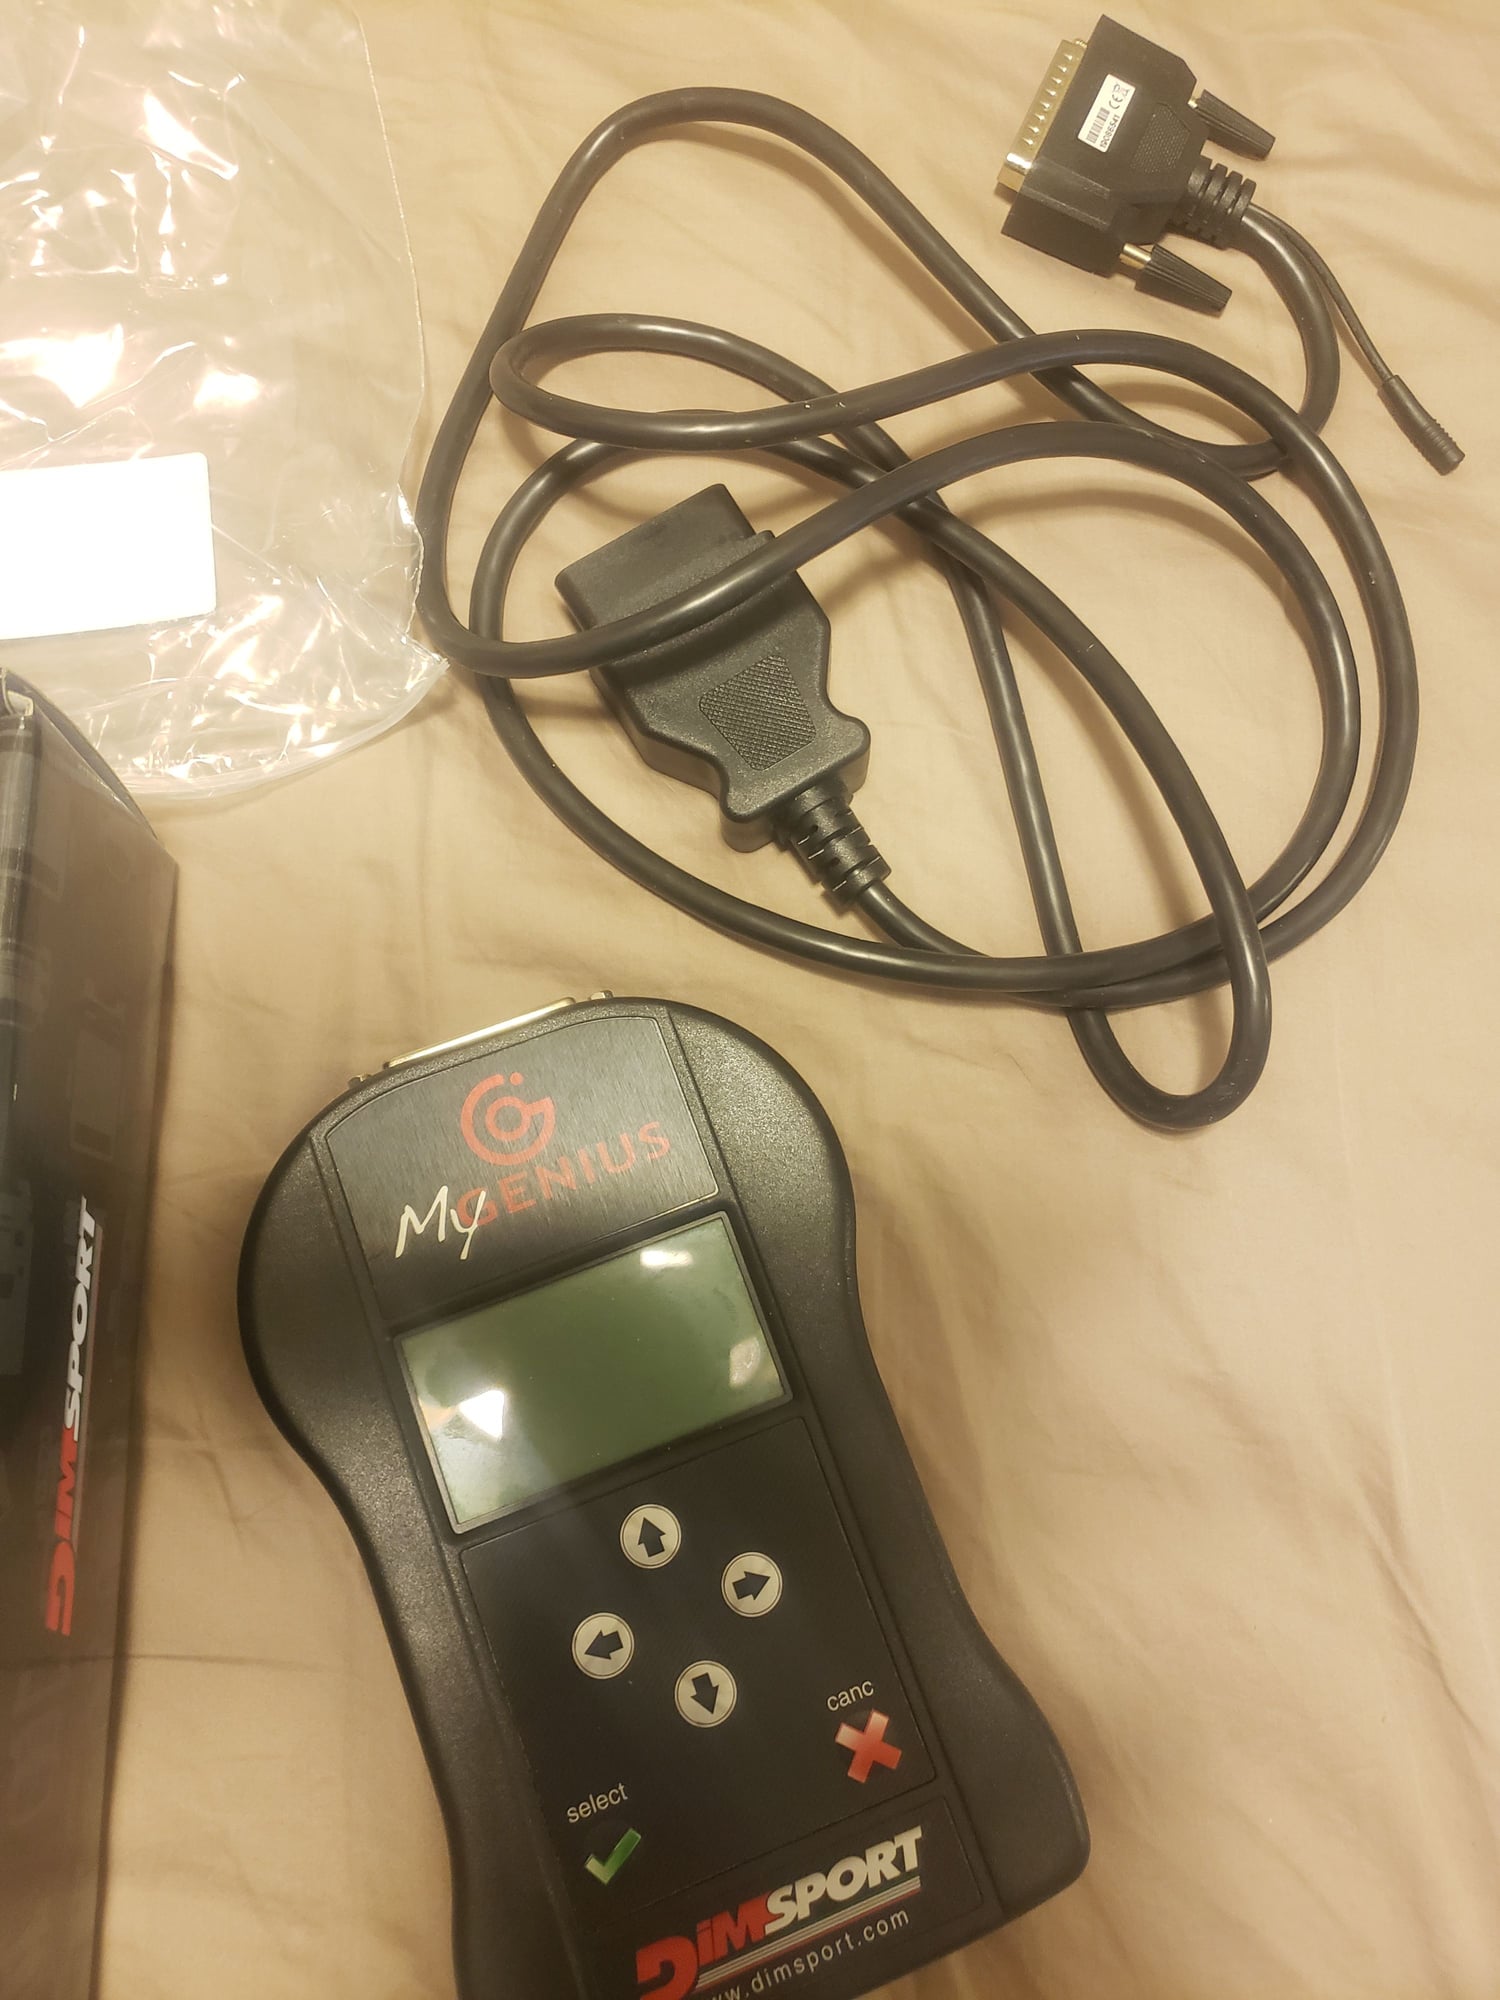 Accessories - DimSport OBDII Handheld Flash Programming Device - Used - 0  All Models - Los Angeles, CA 91423, United States